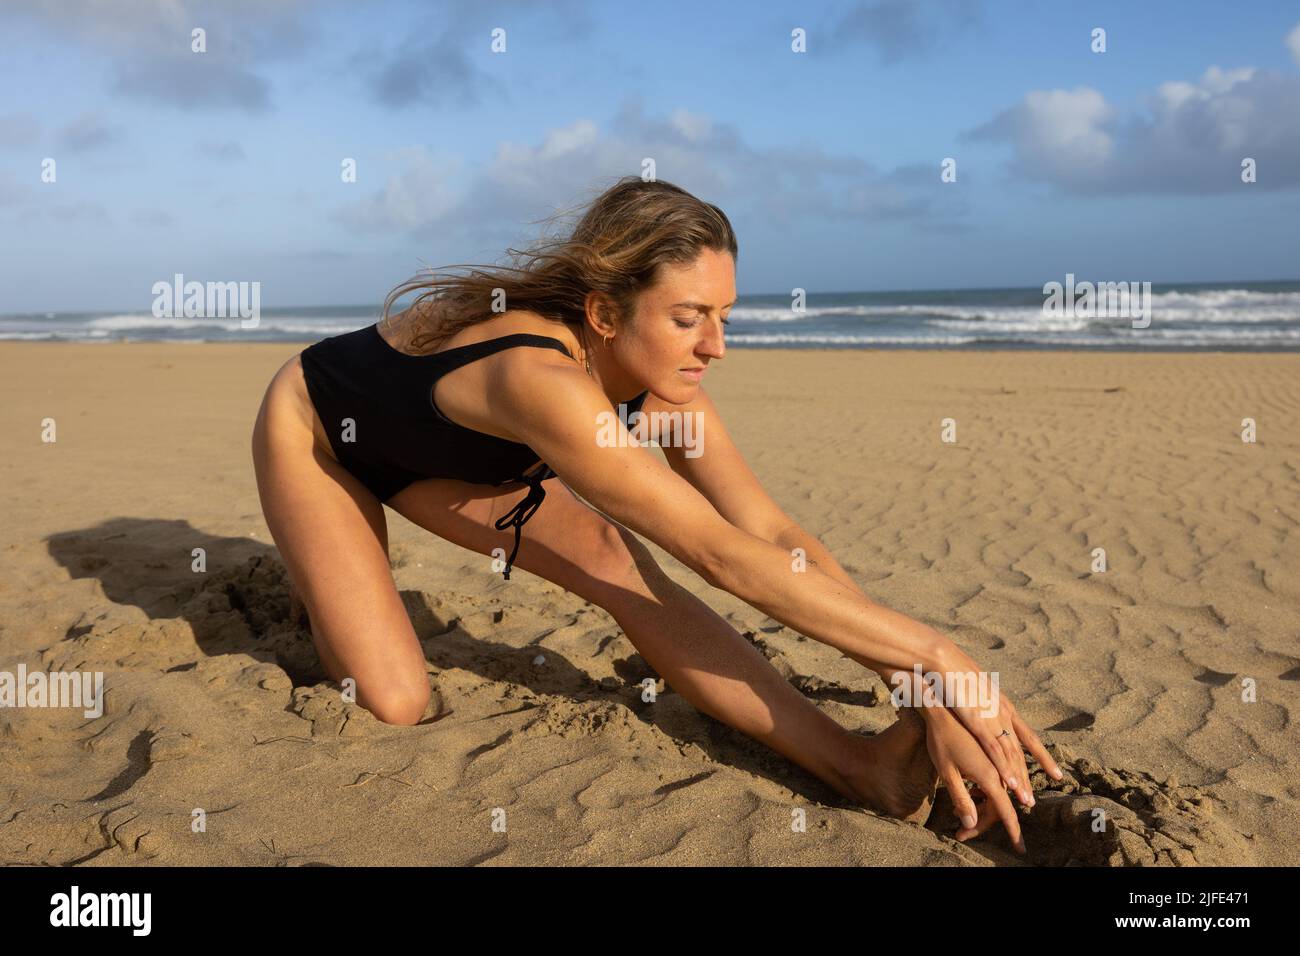 German woman performing stretching exercises on the beach. Stock Photo